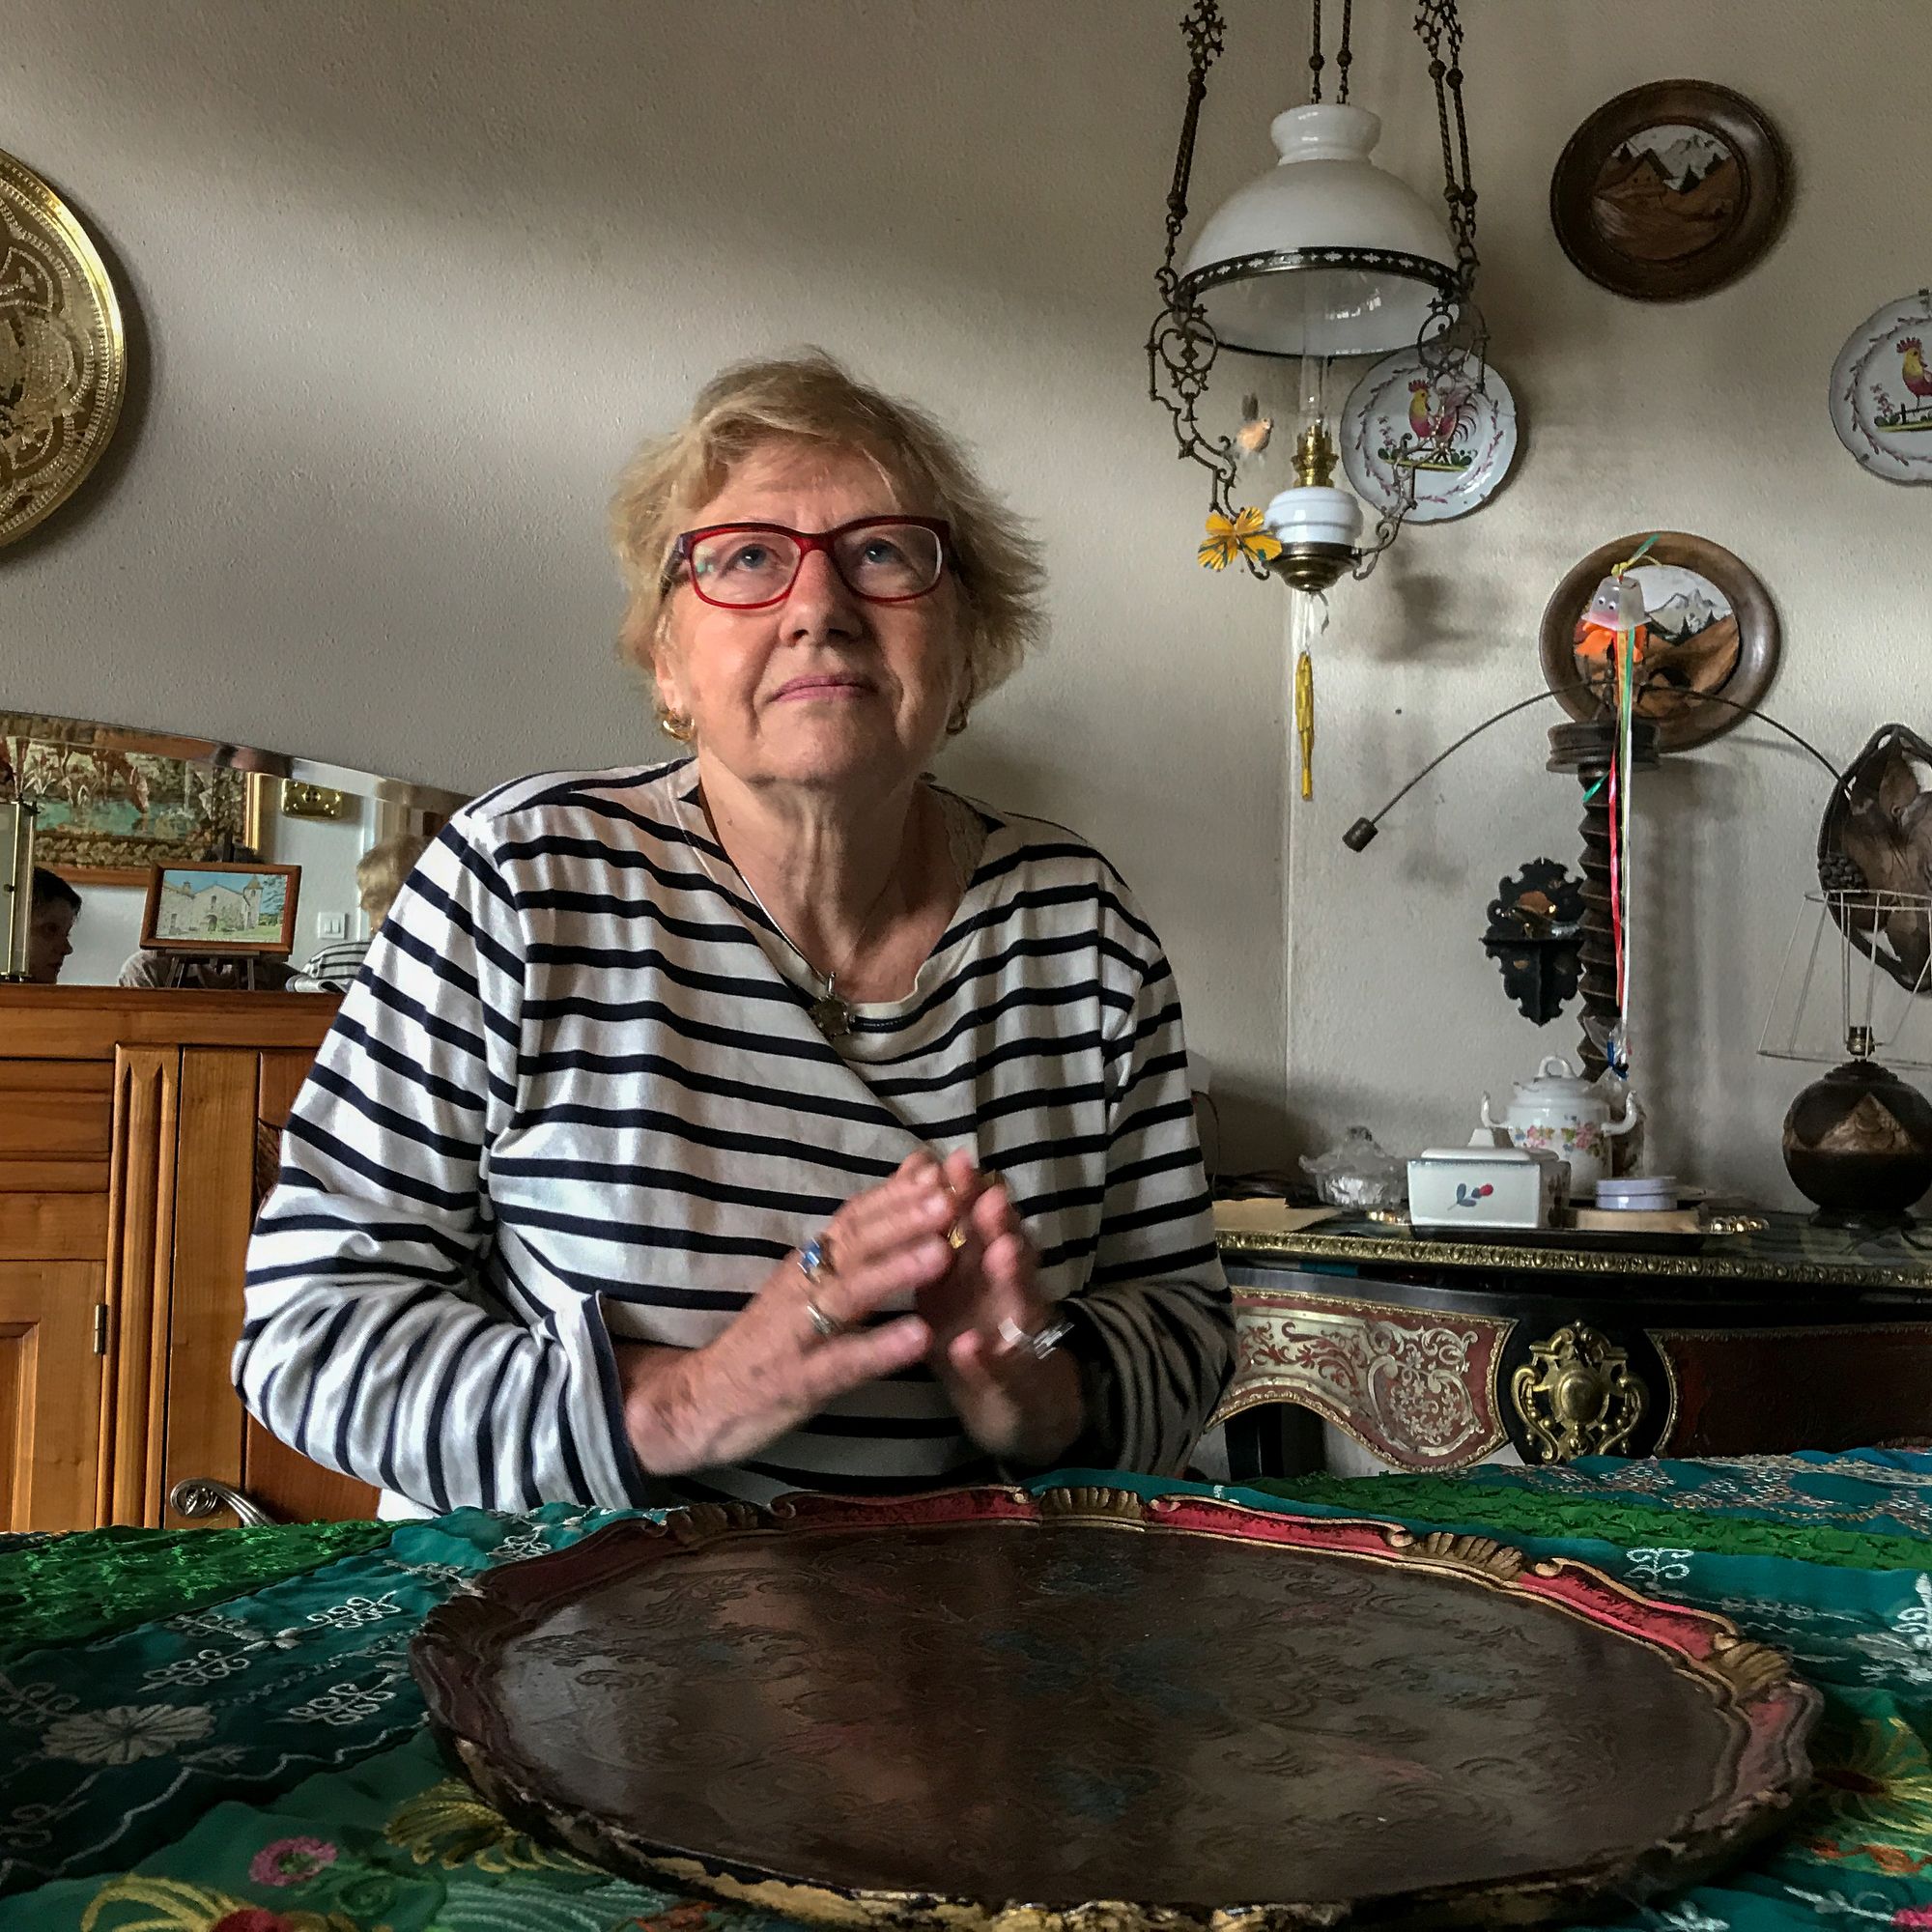 In Mazet-Saint-Voy, 75-year-old Yolande Chabanas tells the story of how her parents hid Jews in holes they dug under the coal piles the family sold. One time, when German soldiers came in to search the house, her mother offered them food and drink in the kitchen where they sat until an officer came by to check up on them. They told him that they had already searched the house and found no one. Image by Lucian Perkins. France, 2018.